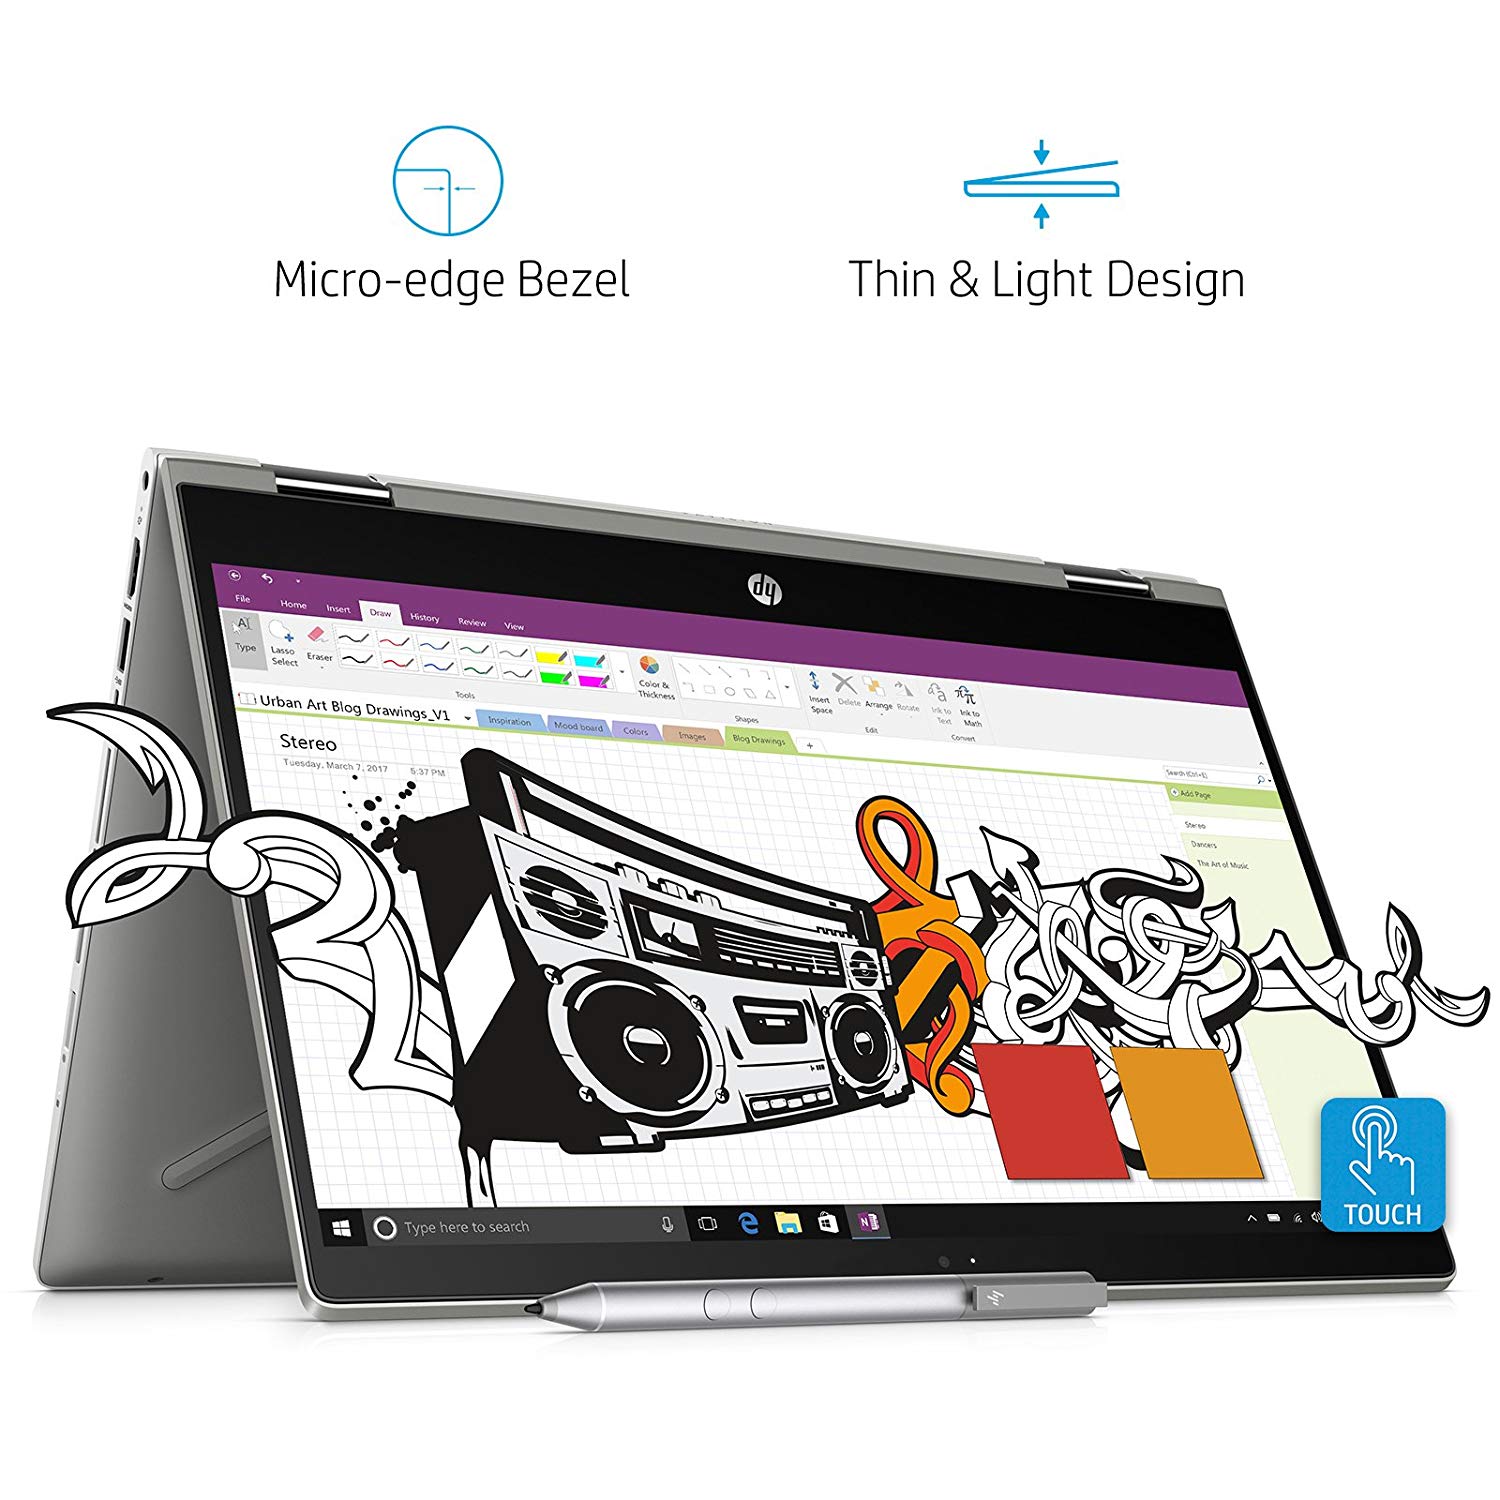 HP Pavilion x360 Intel Core i7 8th Gen 14-inch Touchscreen 2-in-1 FHD Thin and Light Laptop (8GB/16GB Optane/1TB HDD/Windows 10 Home/MS Office/4GB Graphics/Mineral Silver/1.59 kg), cd0055TX